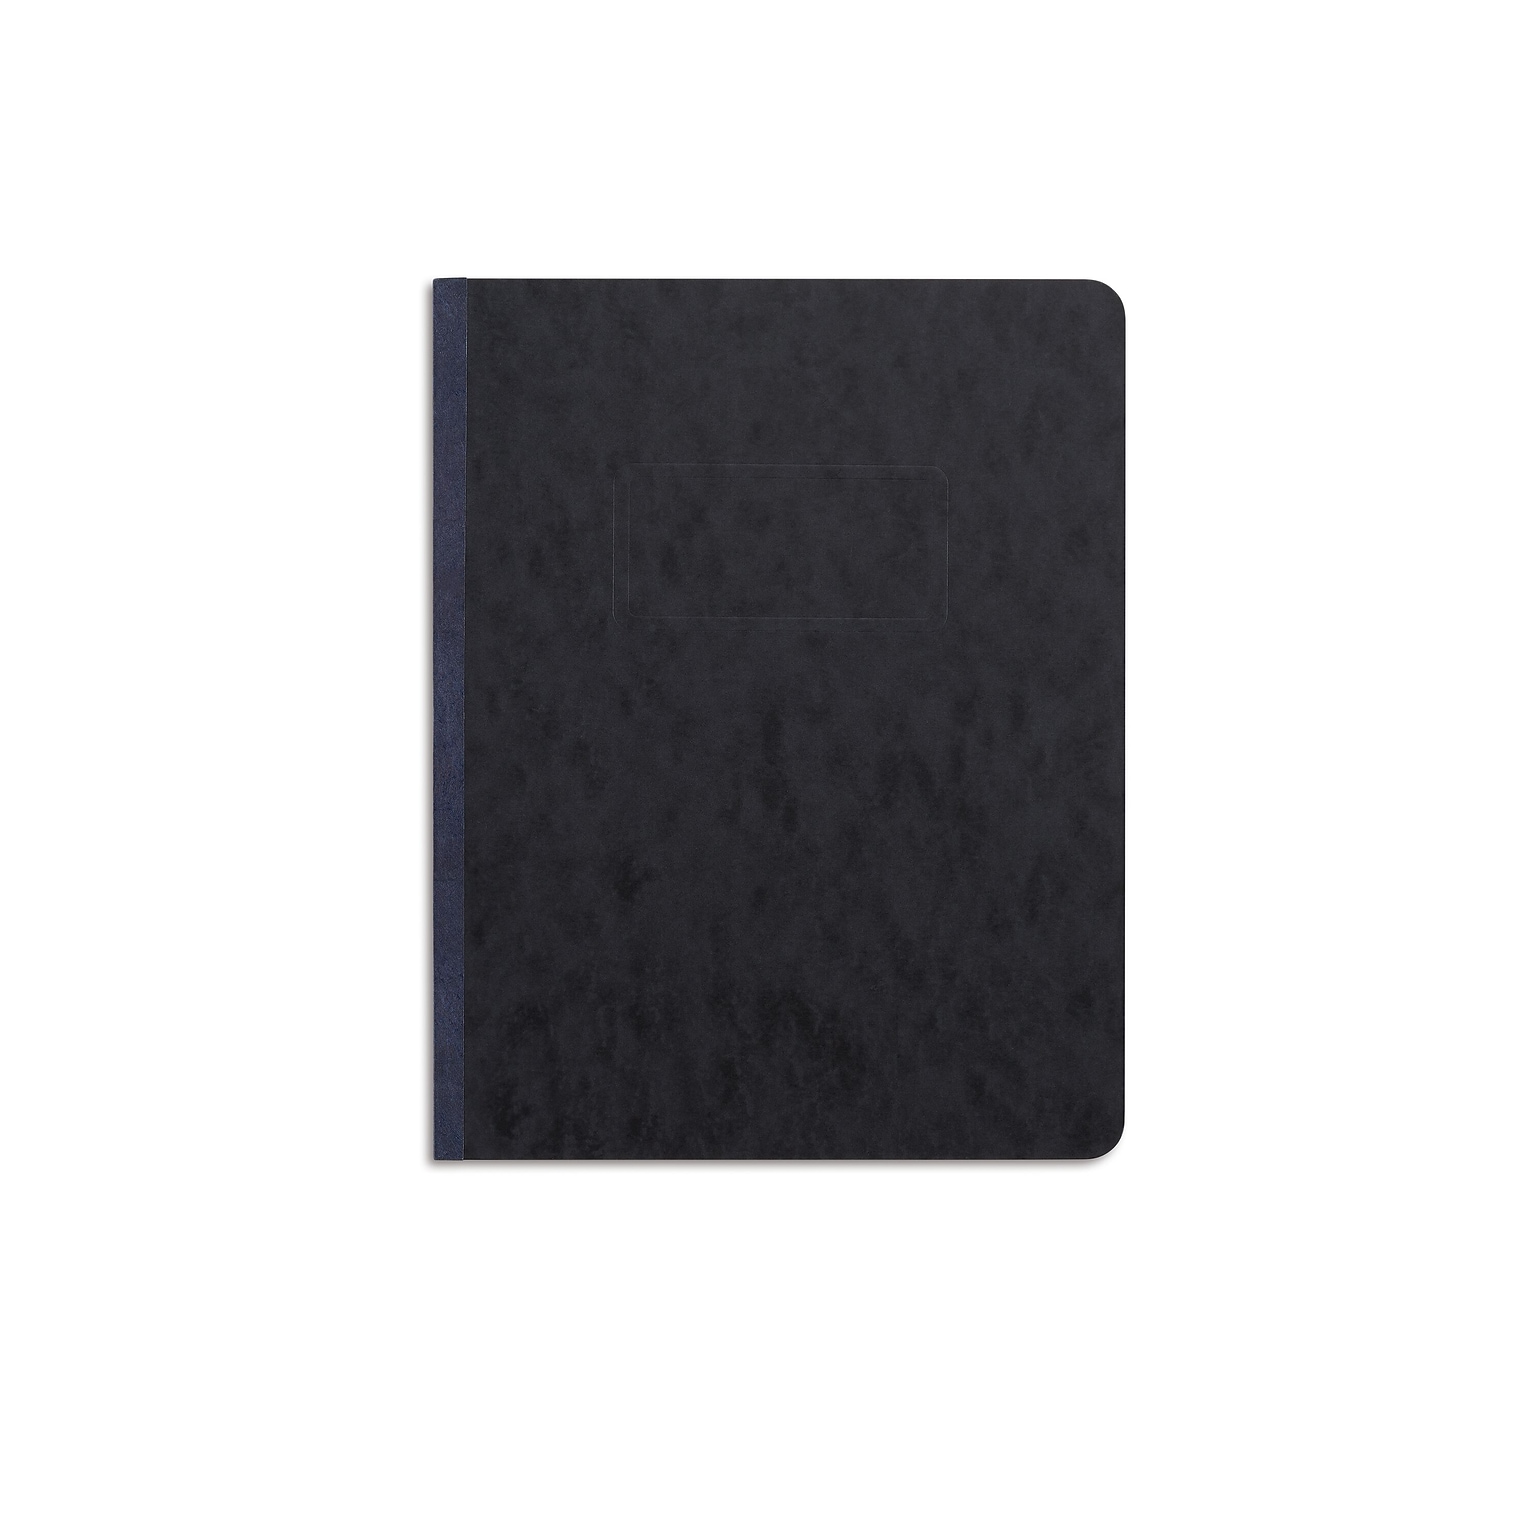 Quill Brand® Prong-Style Pressboard Covers, 8-1/2 x 11, Black (740401)